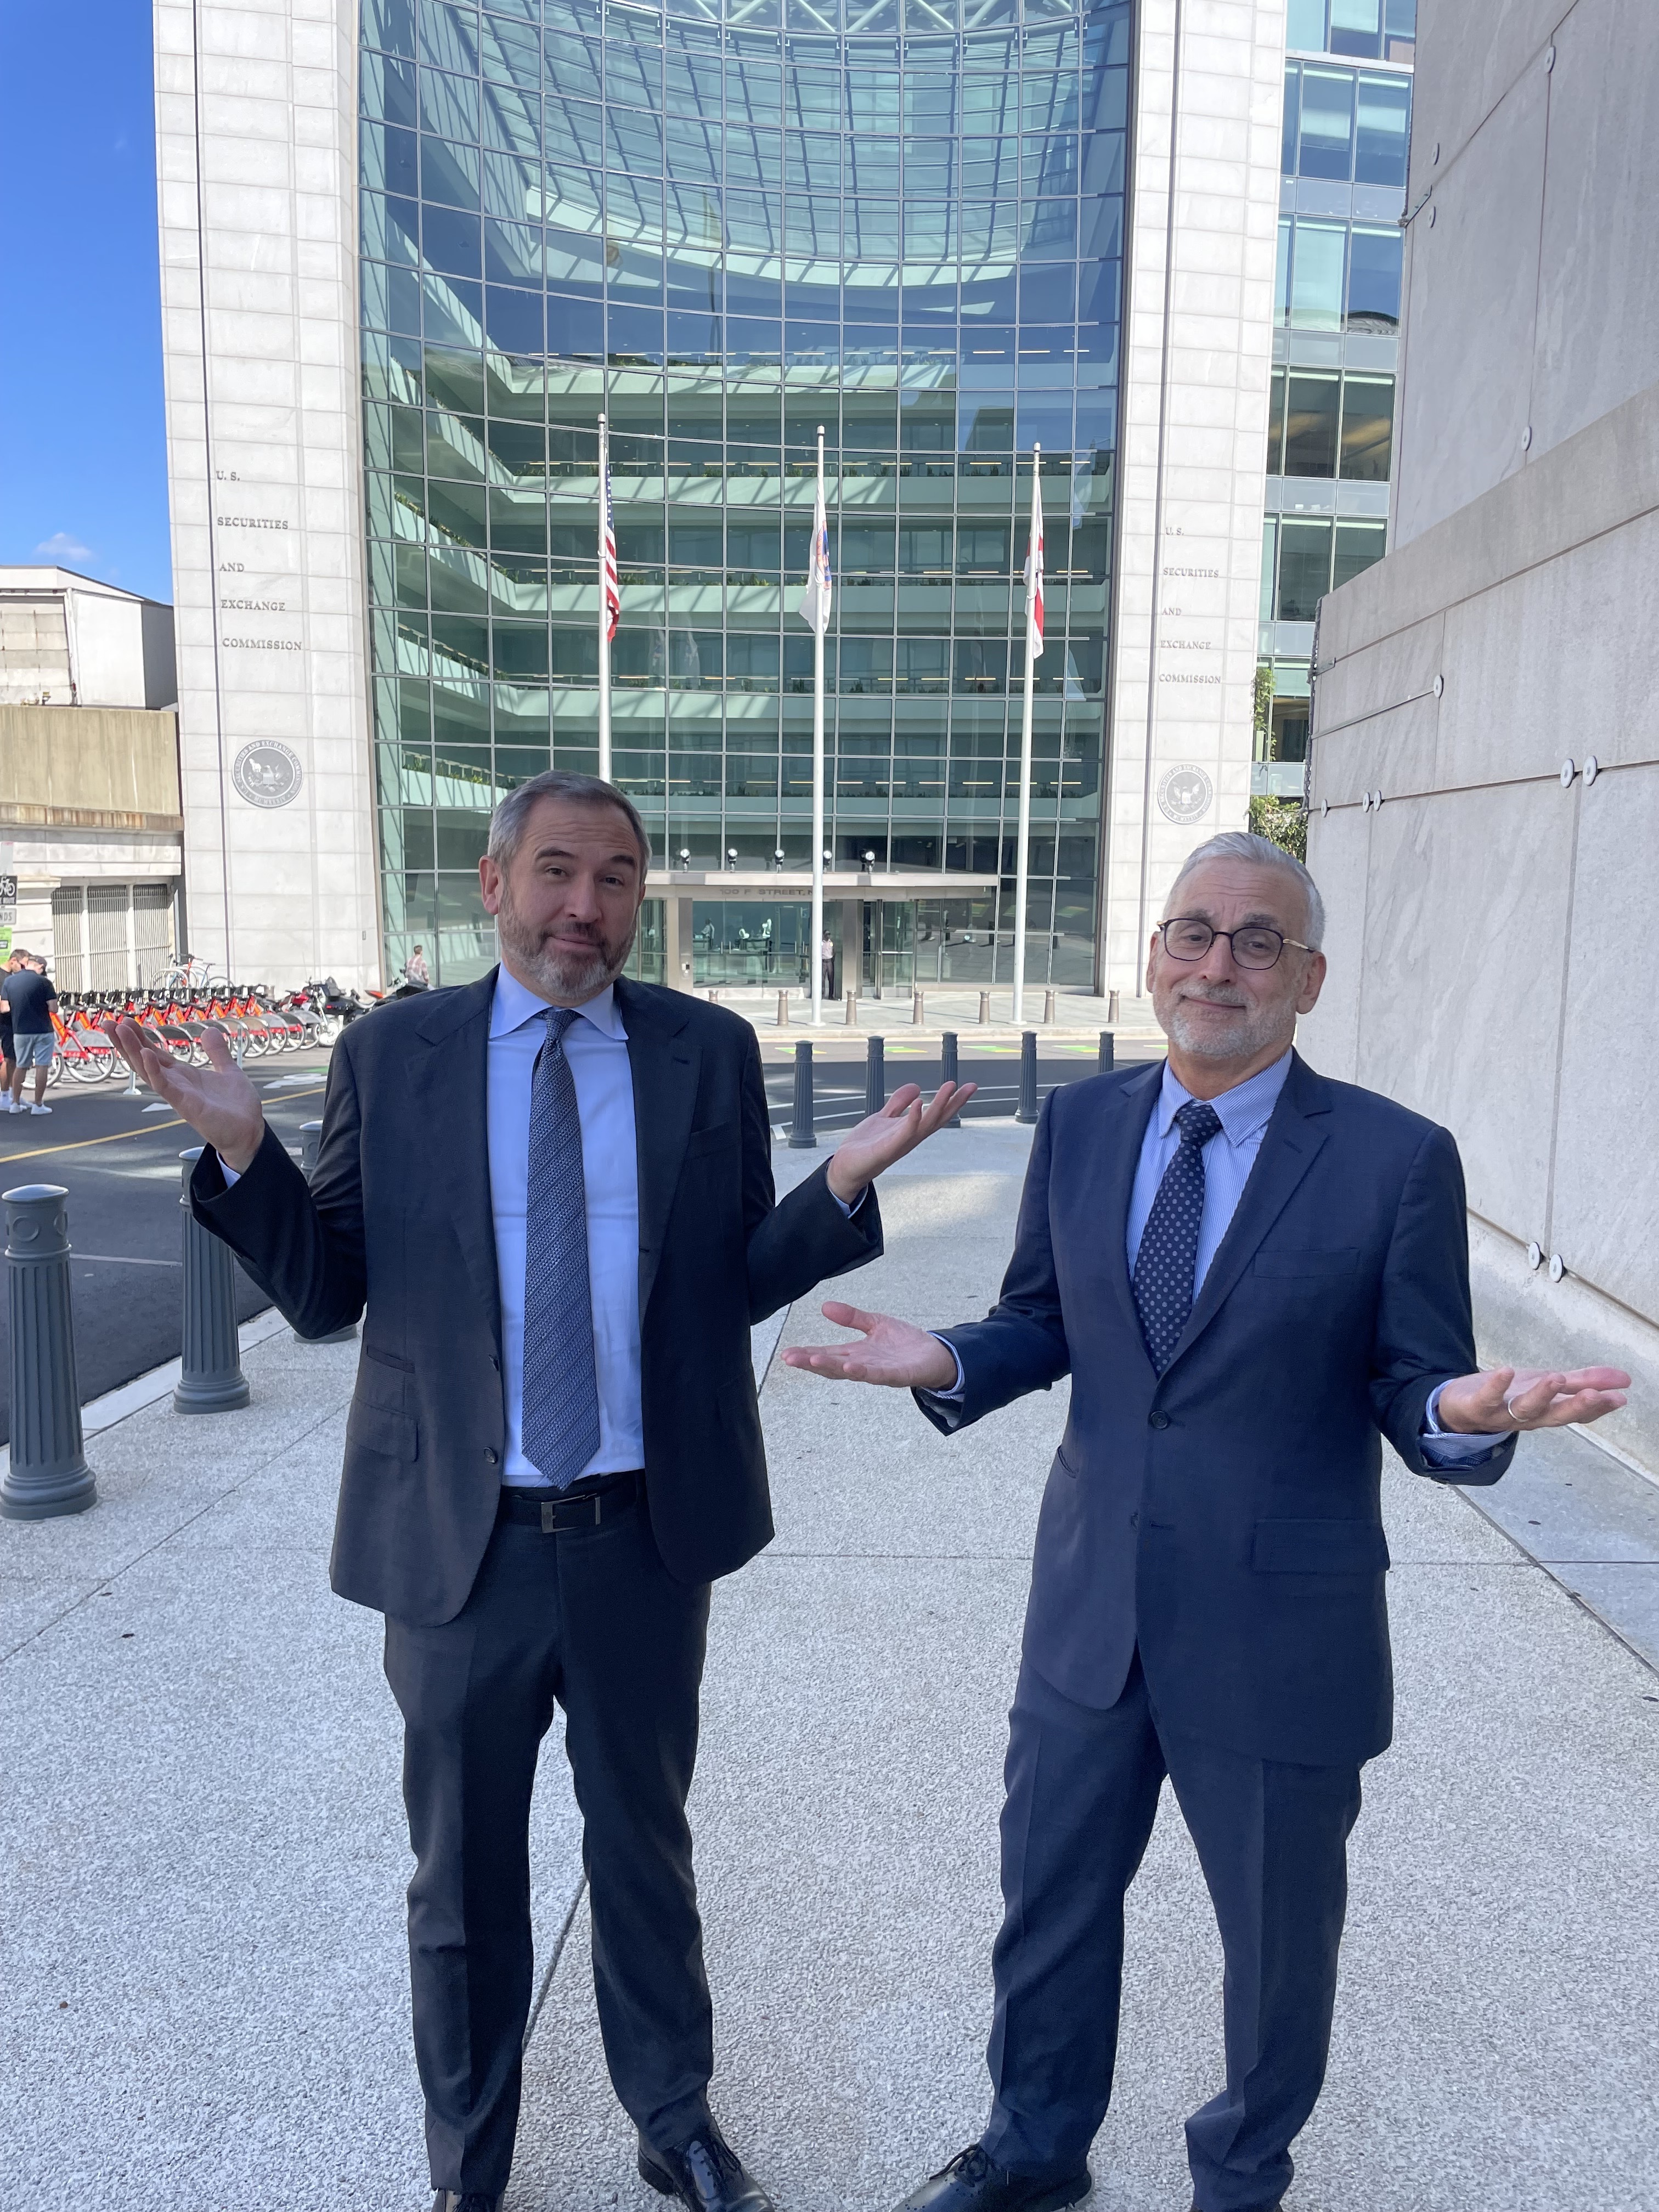 Ripple CEO Garlinghouse and CLO Alderoty in front of the SEC building